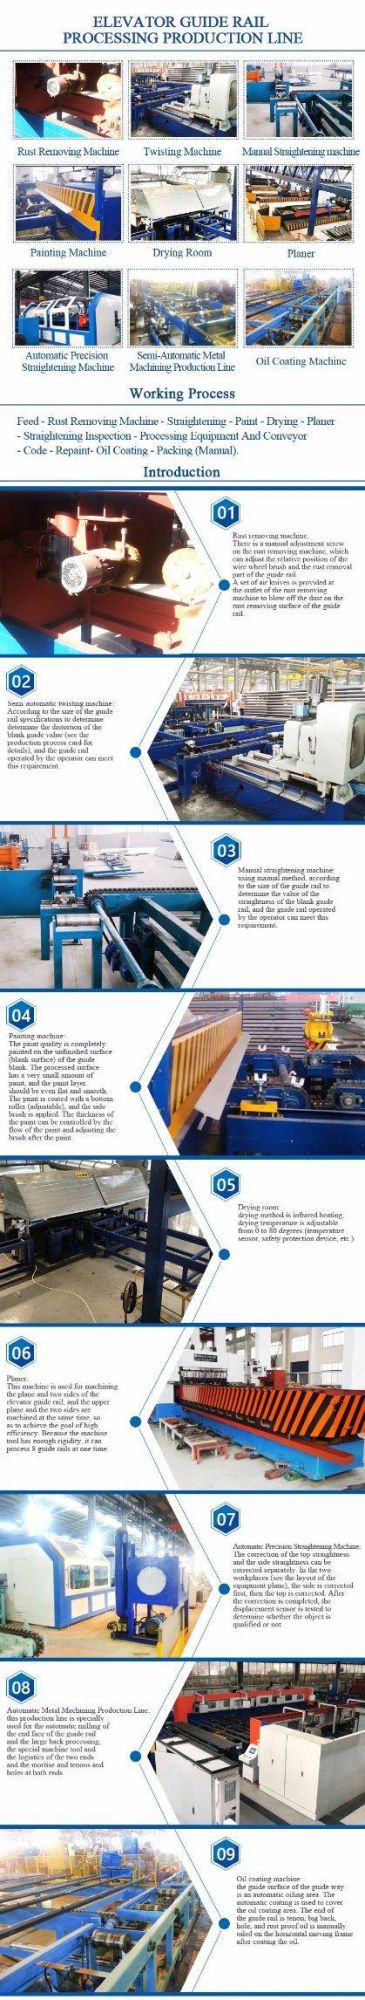 Direct Factory Selling Metal Profiles Production Line Elevator Guide Rail Roll Forming Machine